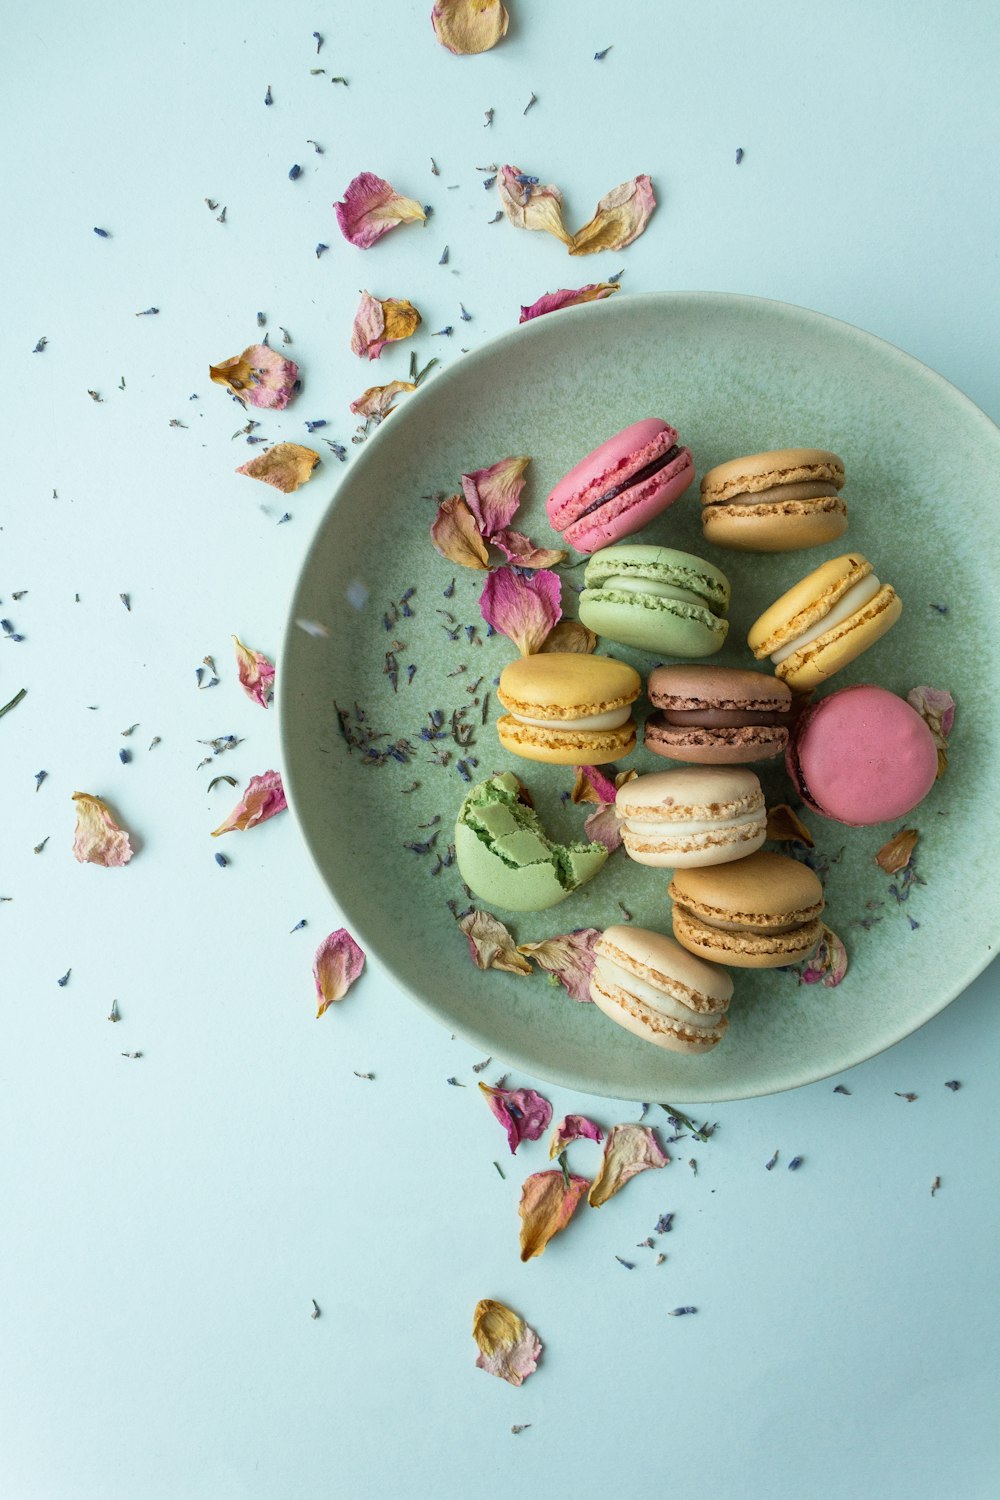 a plate of colorful macaroons on a blue surface